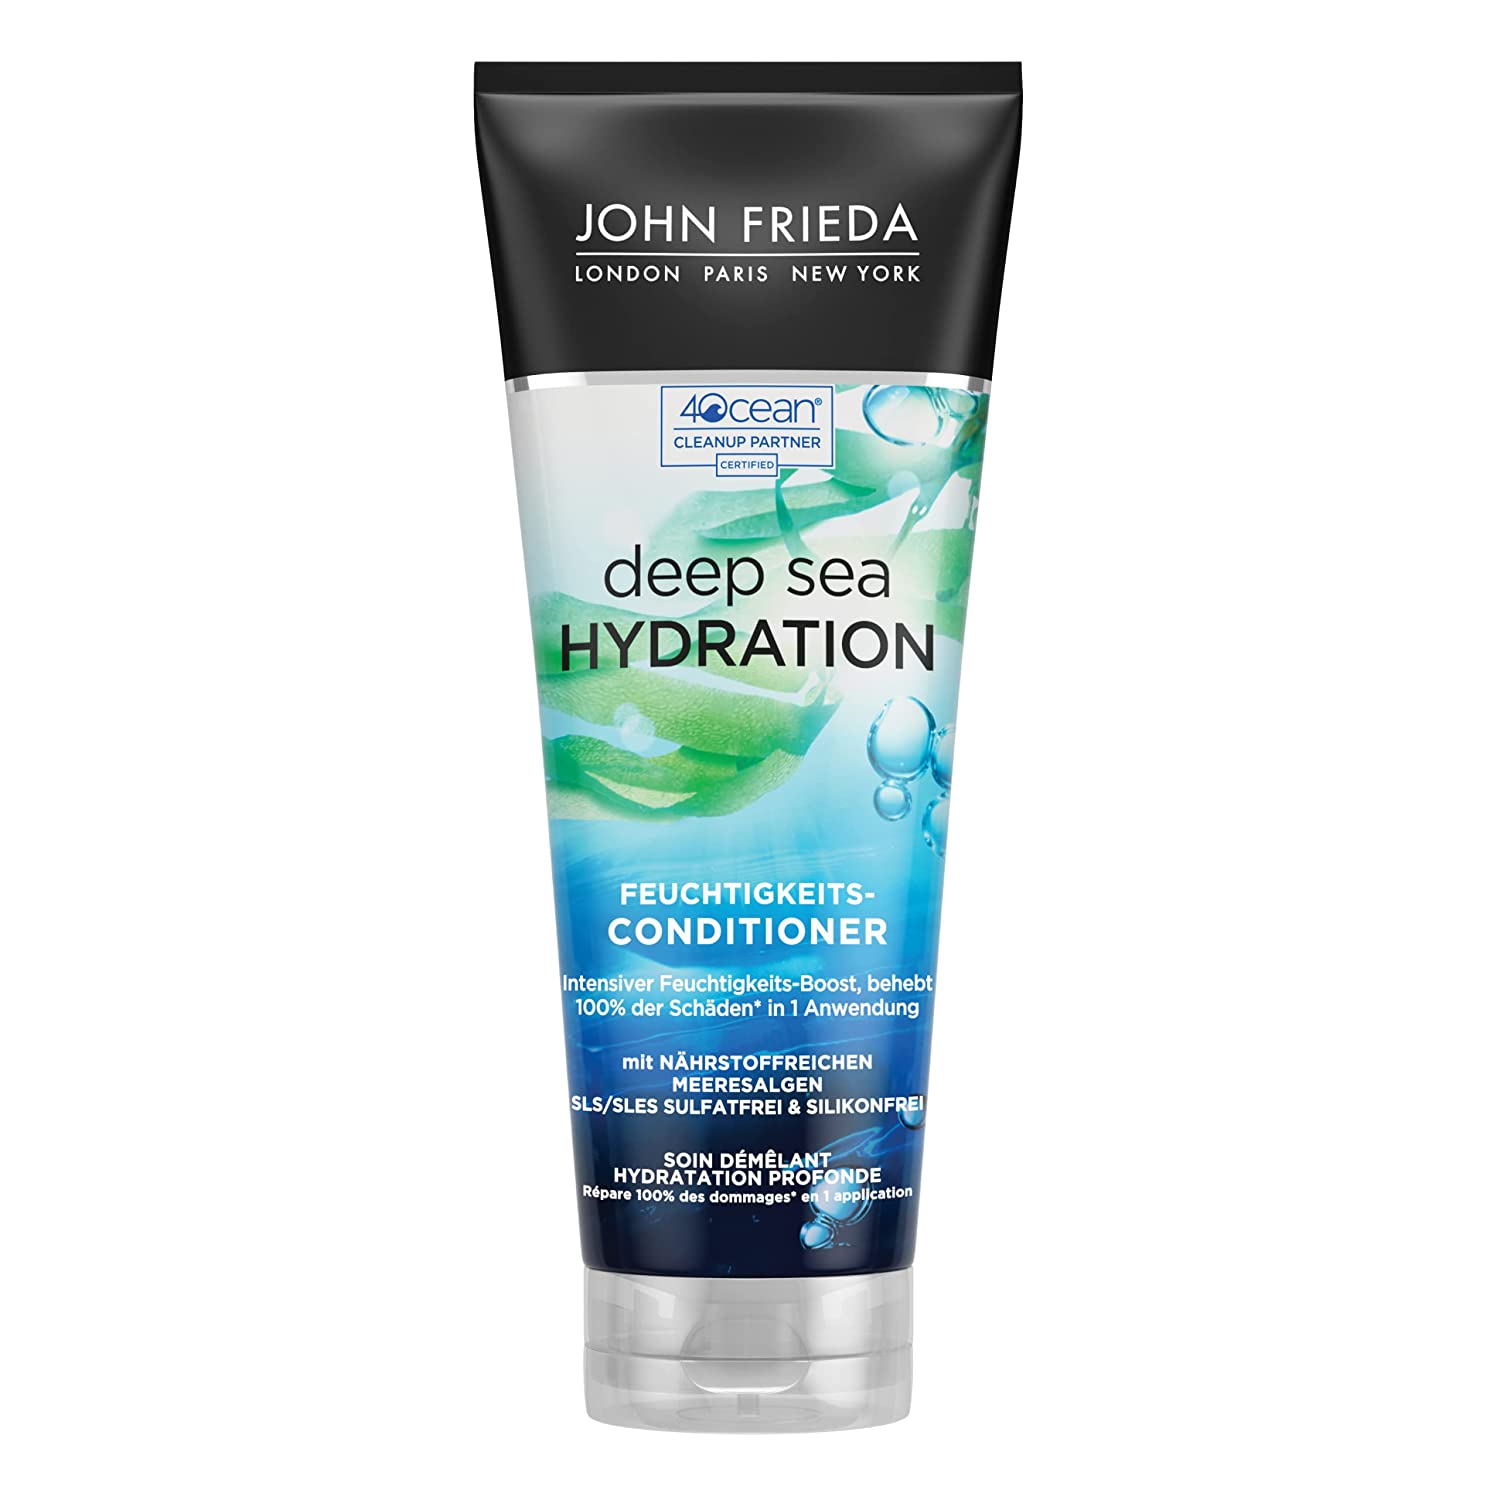 John Frieda Deep Sea Hydation Conditioner - Contents: 250 ml - Intensive Moisture Boost - Fixes 100% of Damage to the Hair Surface in One Application